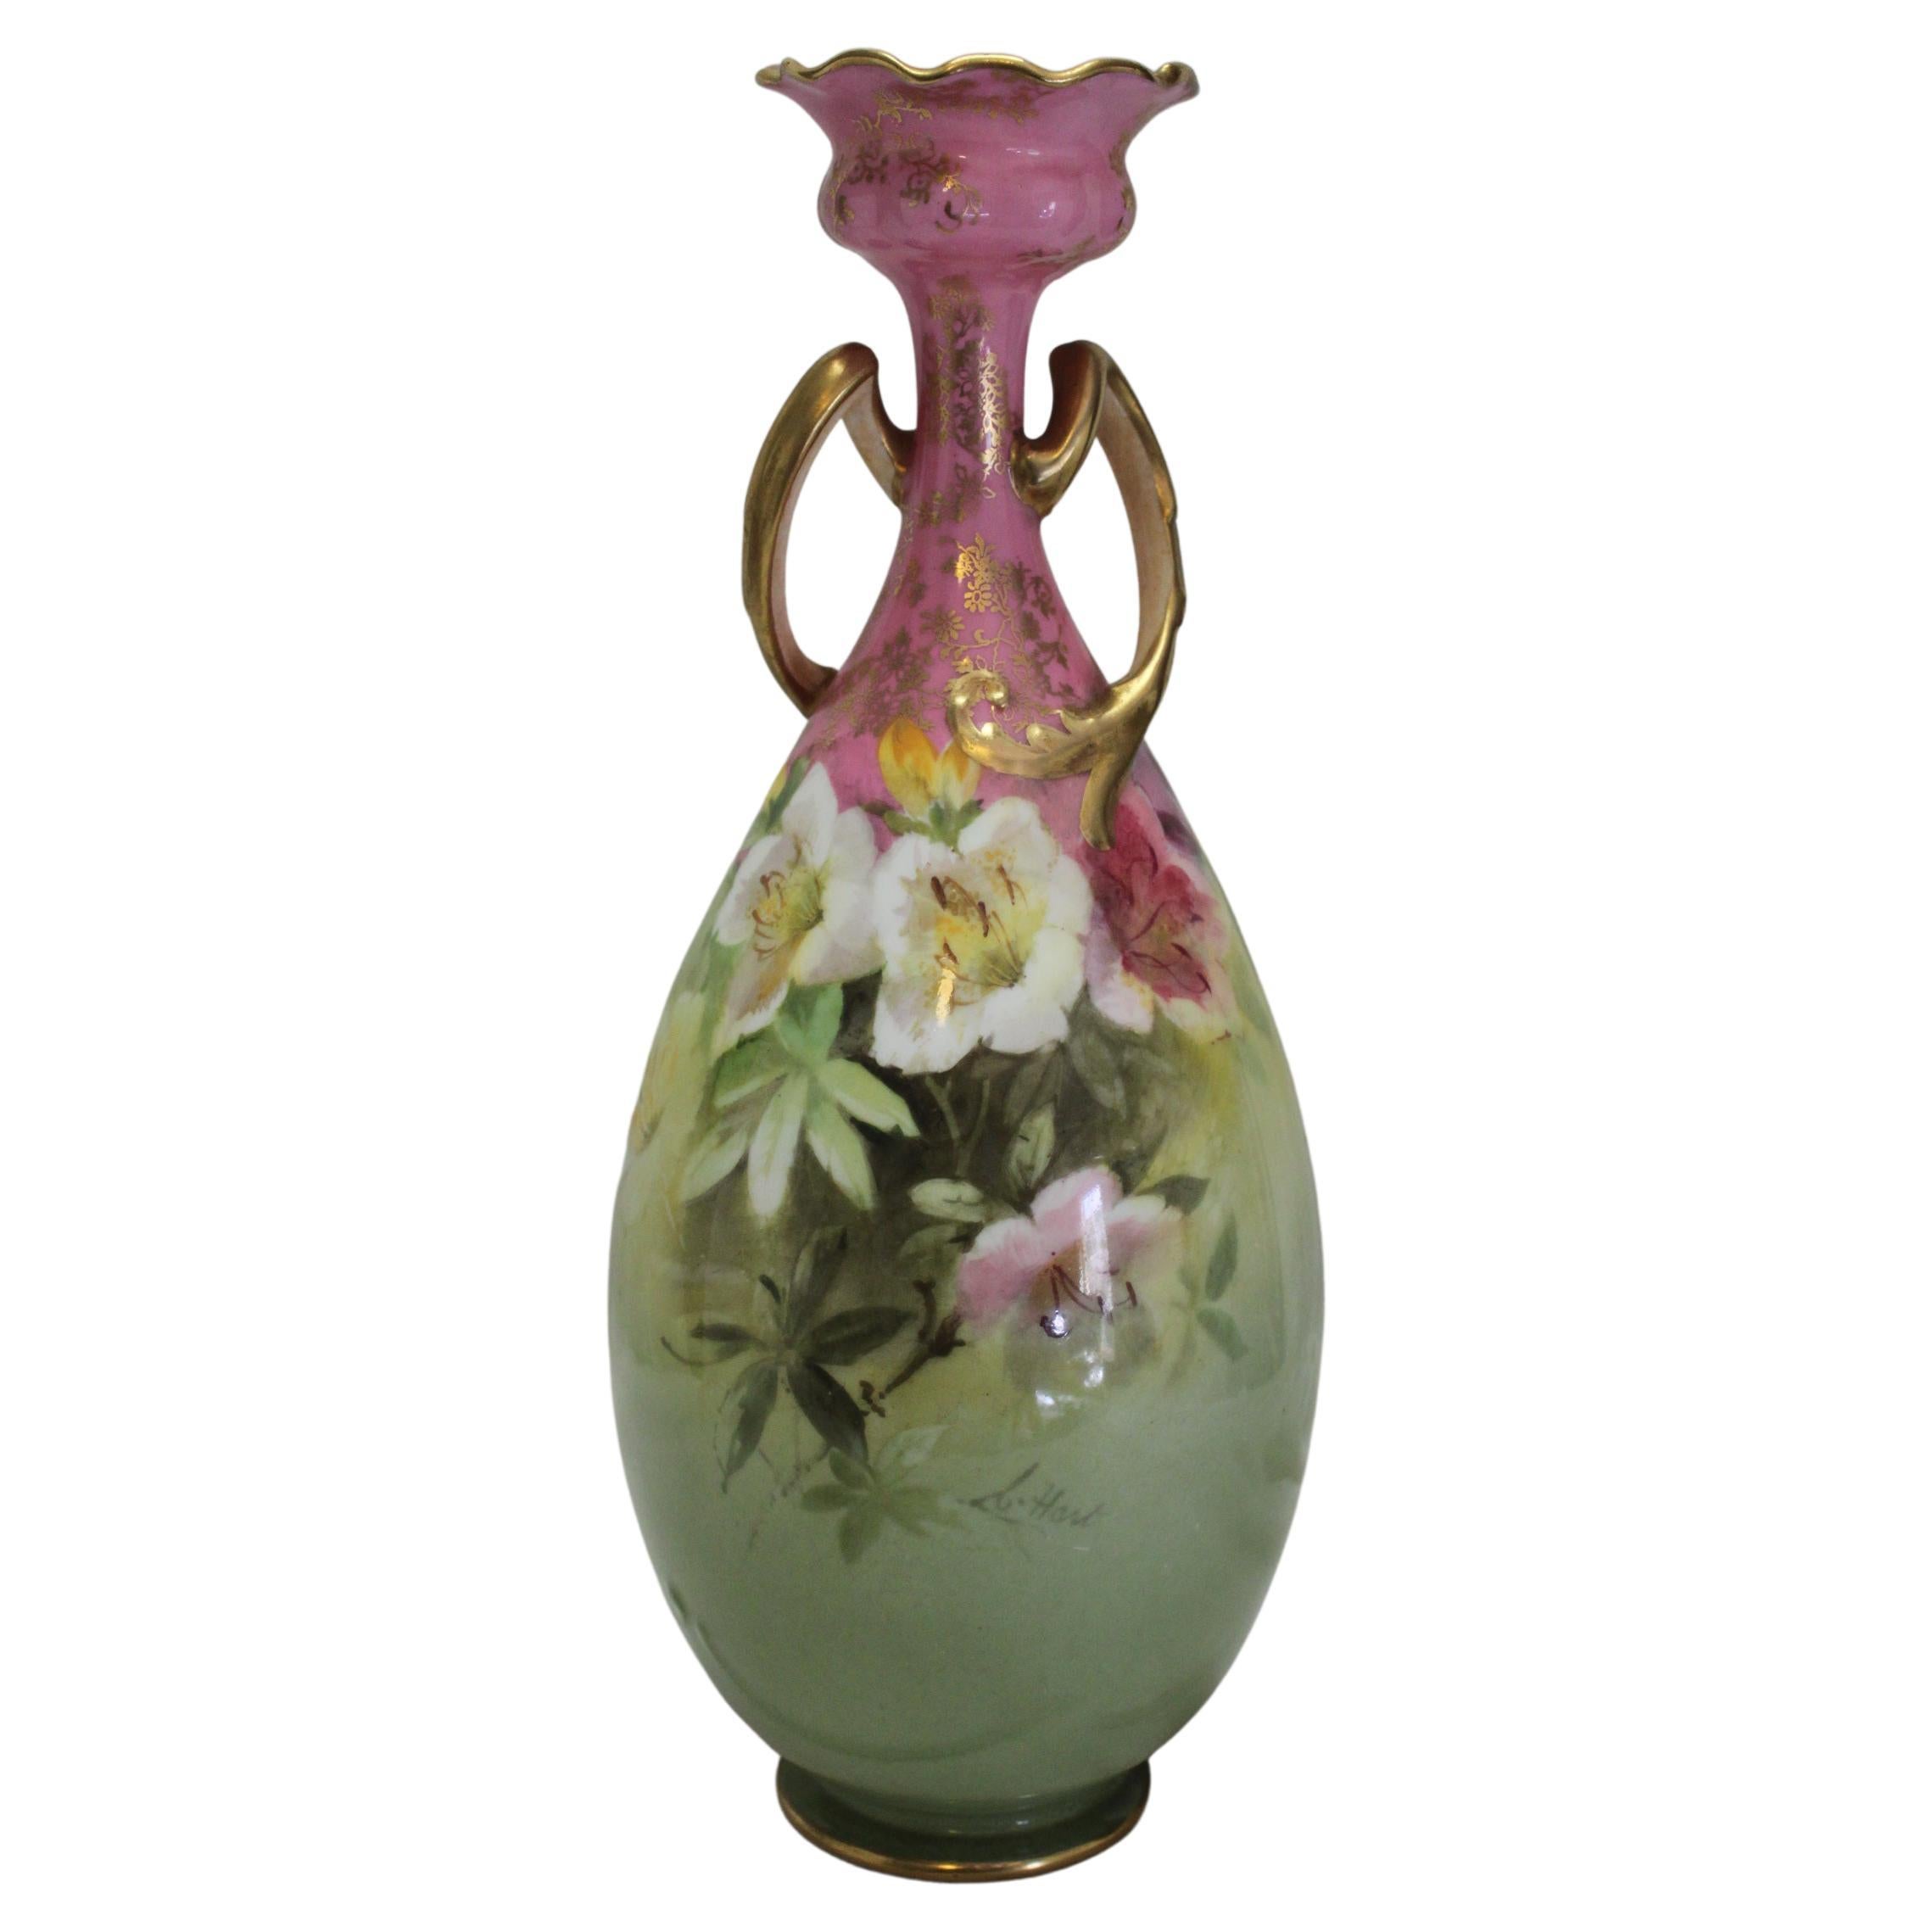 Doulton Luscian Ware Vase Painted by Charles Hart Senior